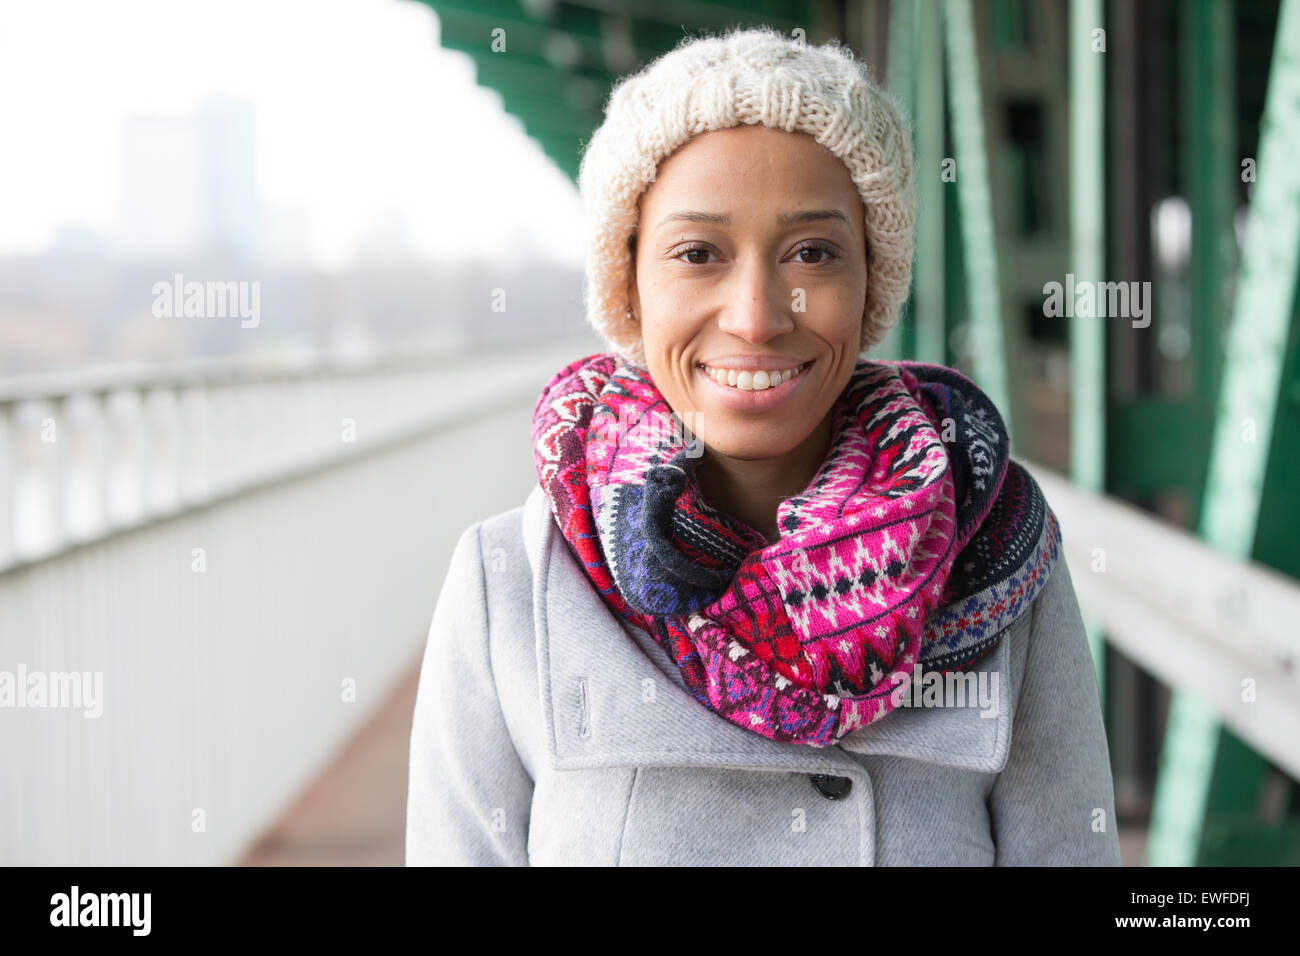 Portrait of happy woman in warm clothing standing outdoors Stock Photo